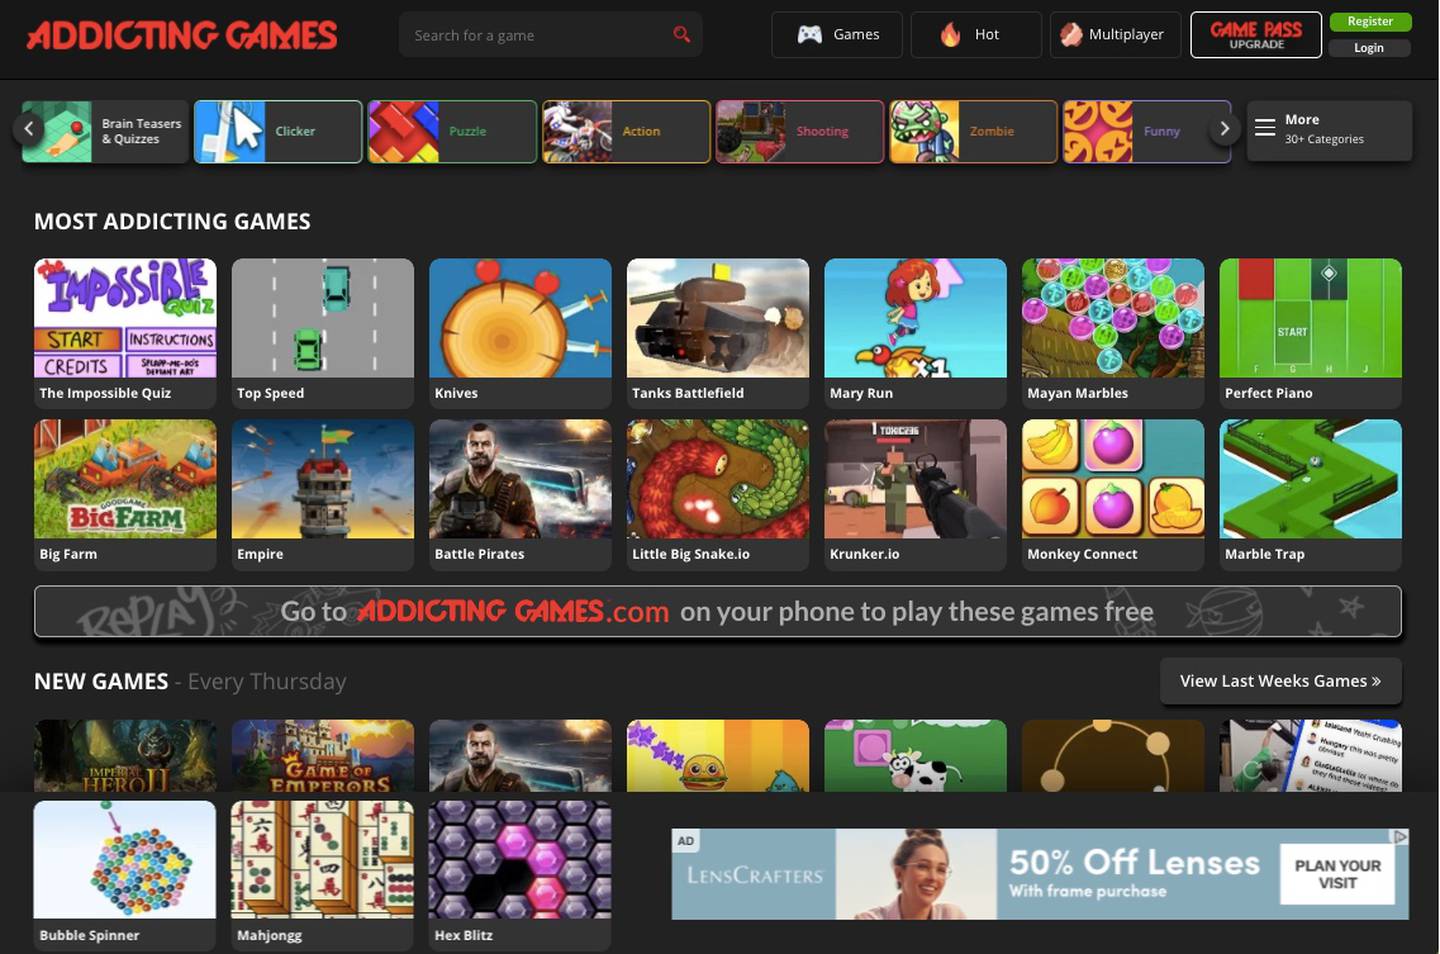 Build A World Online Game For Free - Colaboratory